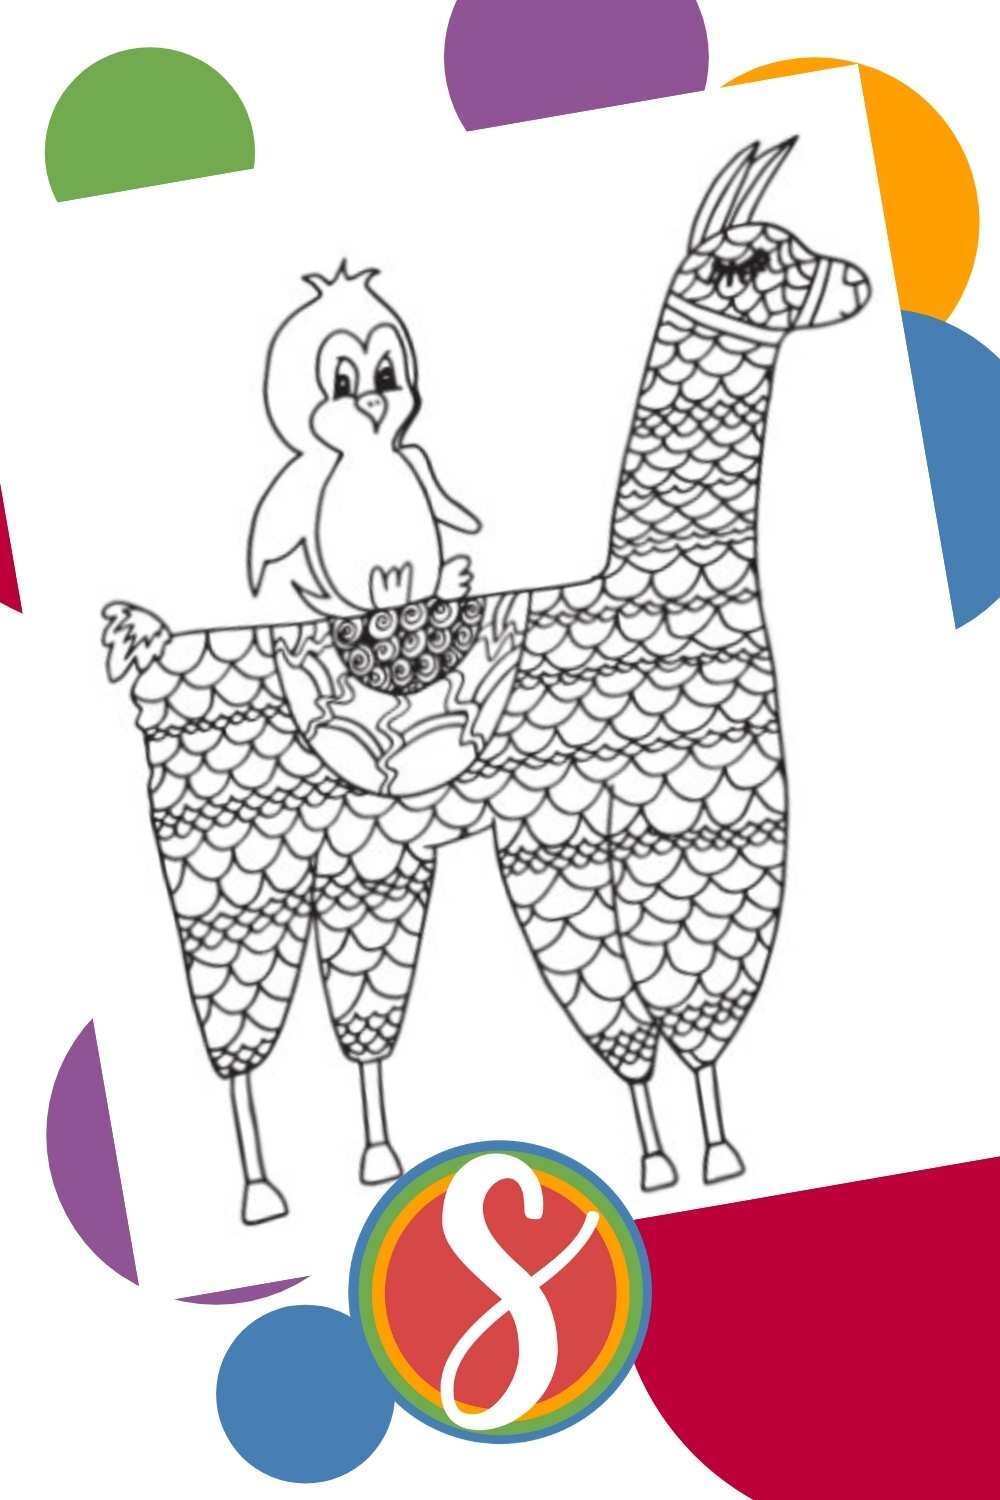 A black and white coloring page with a llama filled with designs to color. On the llama's back is a simple, cute penguin drawing. The coloring page sits on a background of primary colors.